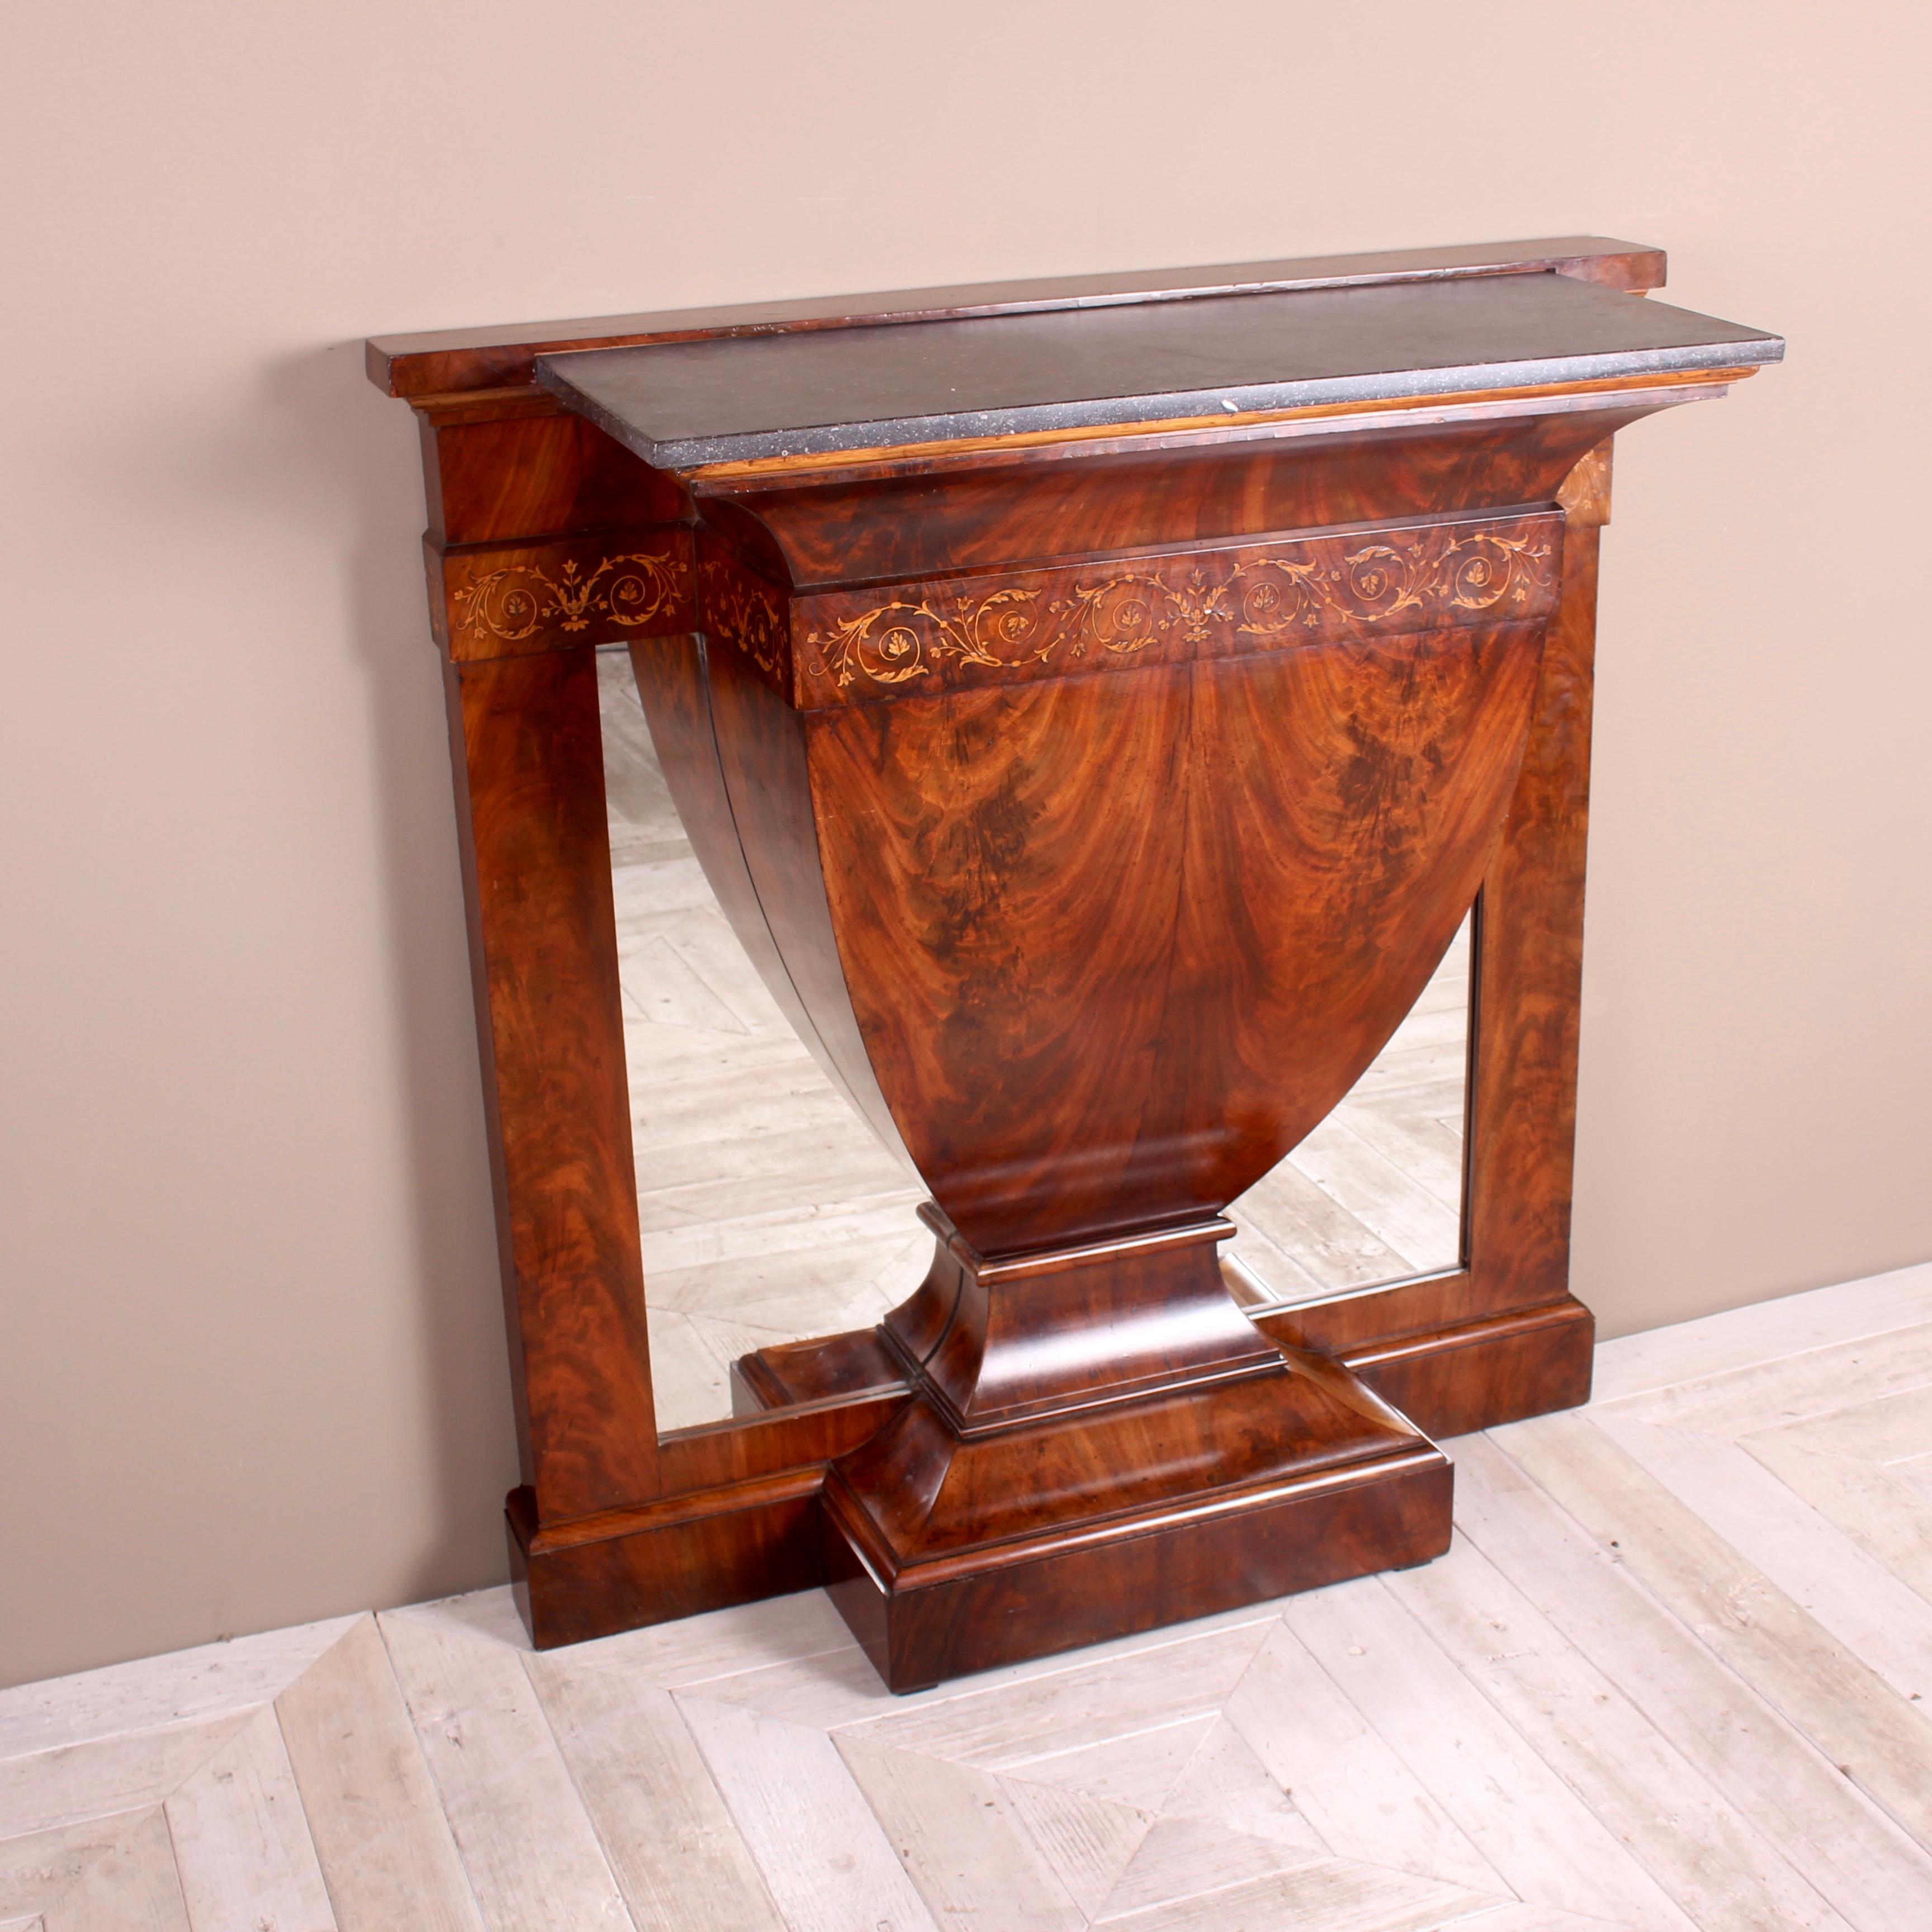 A lovely inlaid mahogany console table with grey marble its top. Having the most wonderful urn-shaped centre section. Beautifully inlaid with scrolling floral decoration to the upper frieze. The grey marble slab sits above the central urn-shaped